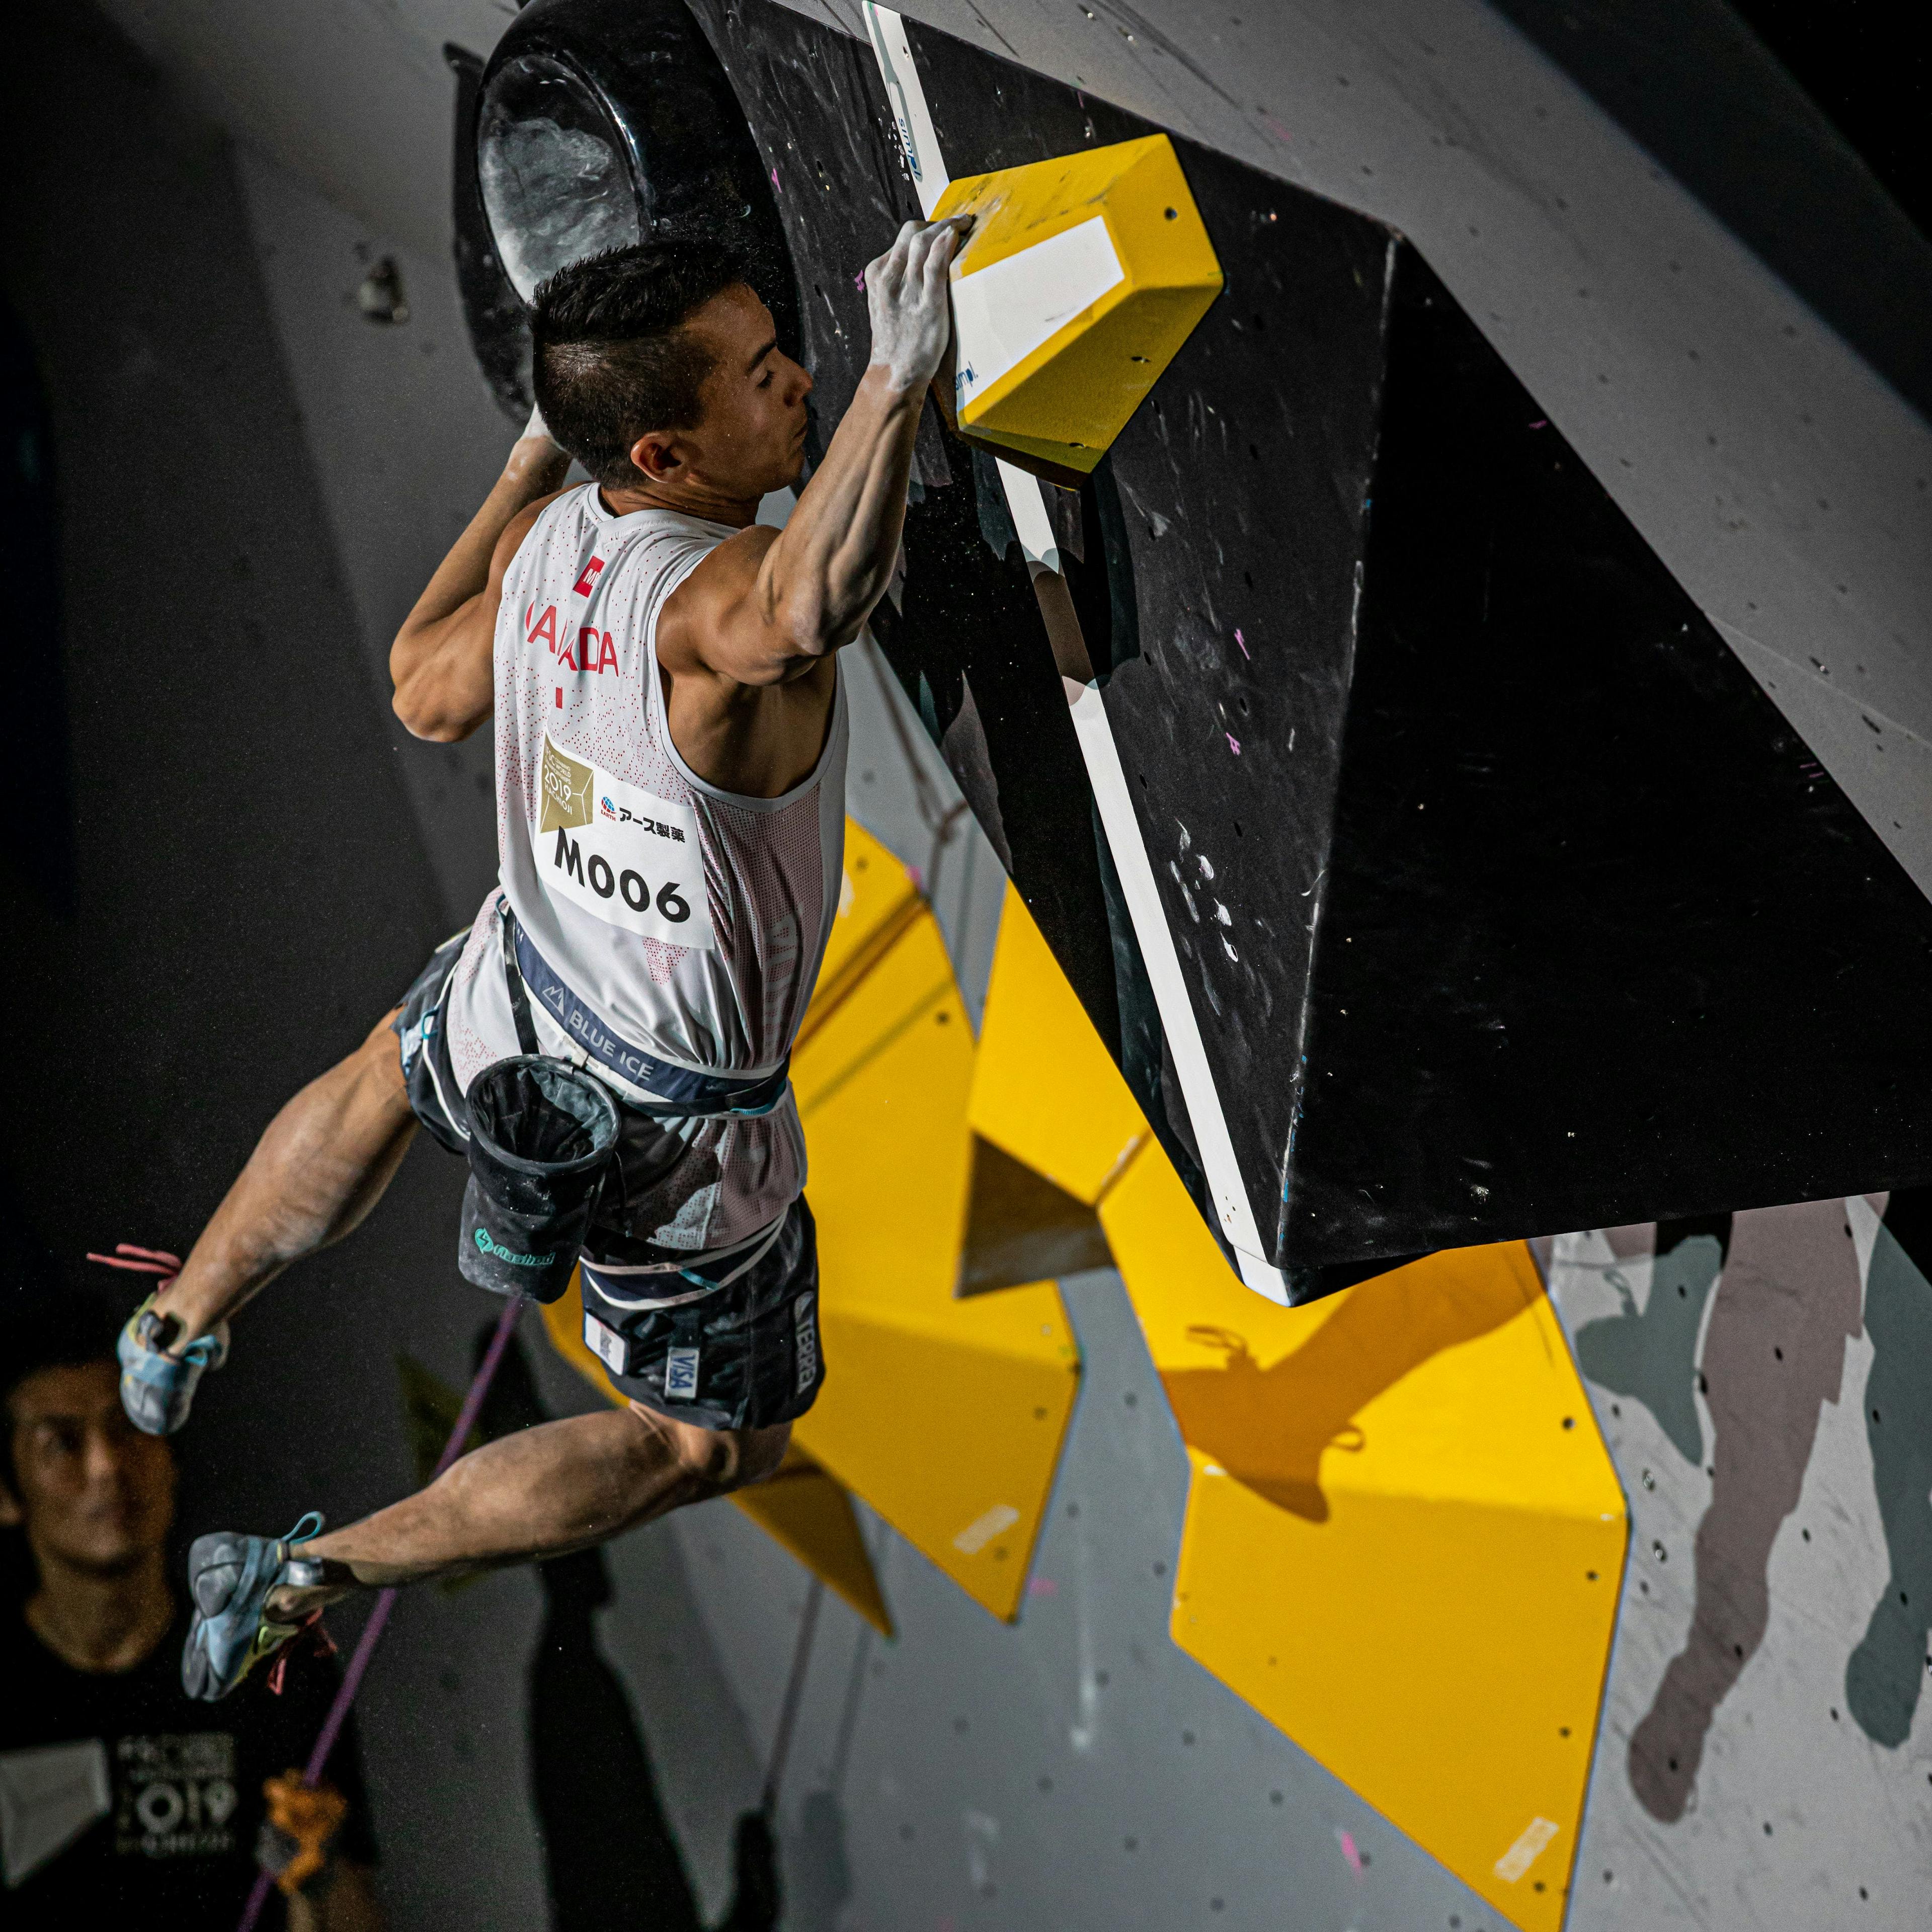 Sean McColl at the 2019 IFSC Climbing World Championships in Japan